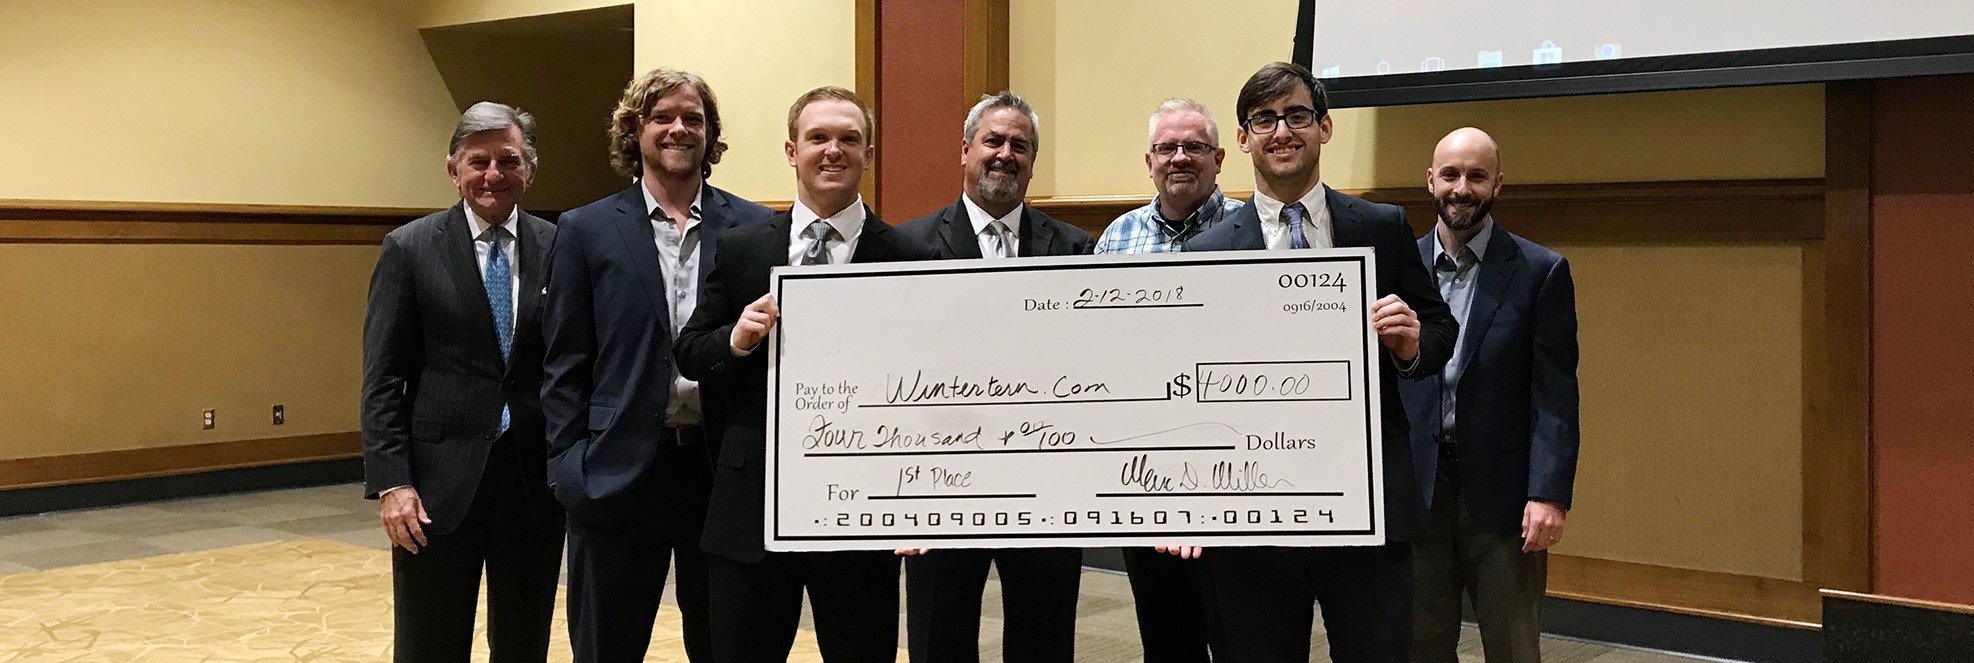 Chandler Blake (holding check, left) and Chris Clark (holding check, right) won first place in the 2018 OBU/HSU Business Plan Competition. They are joined by this year’s panel of judges.